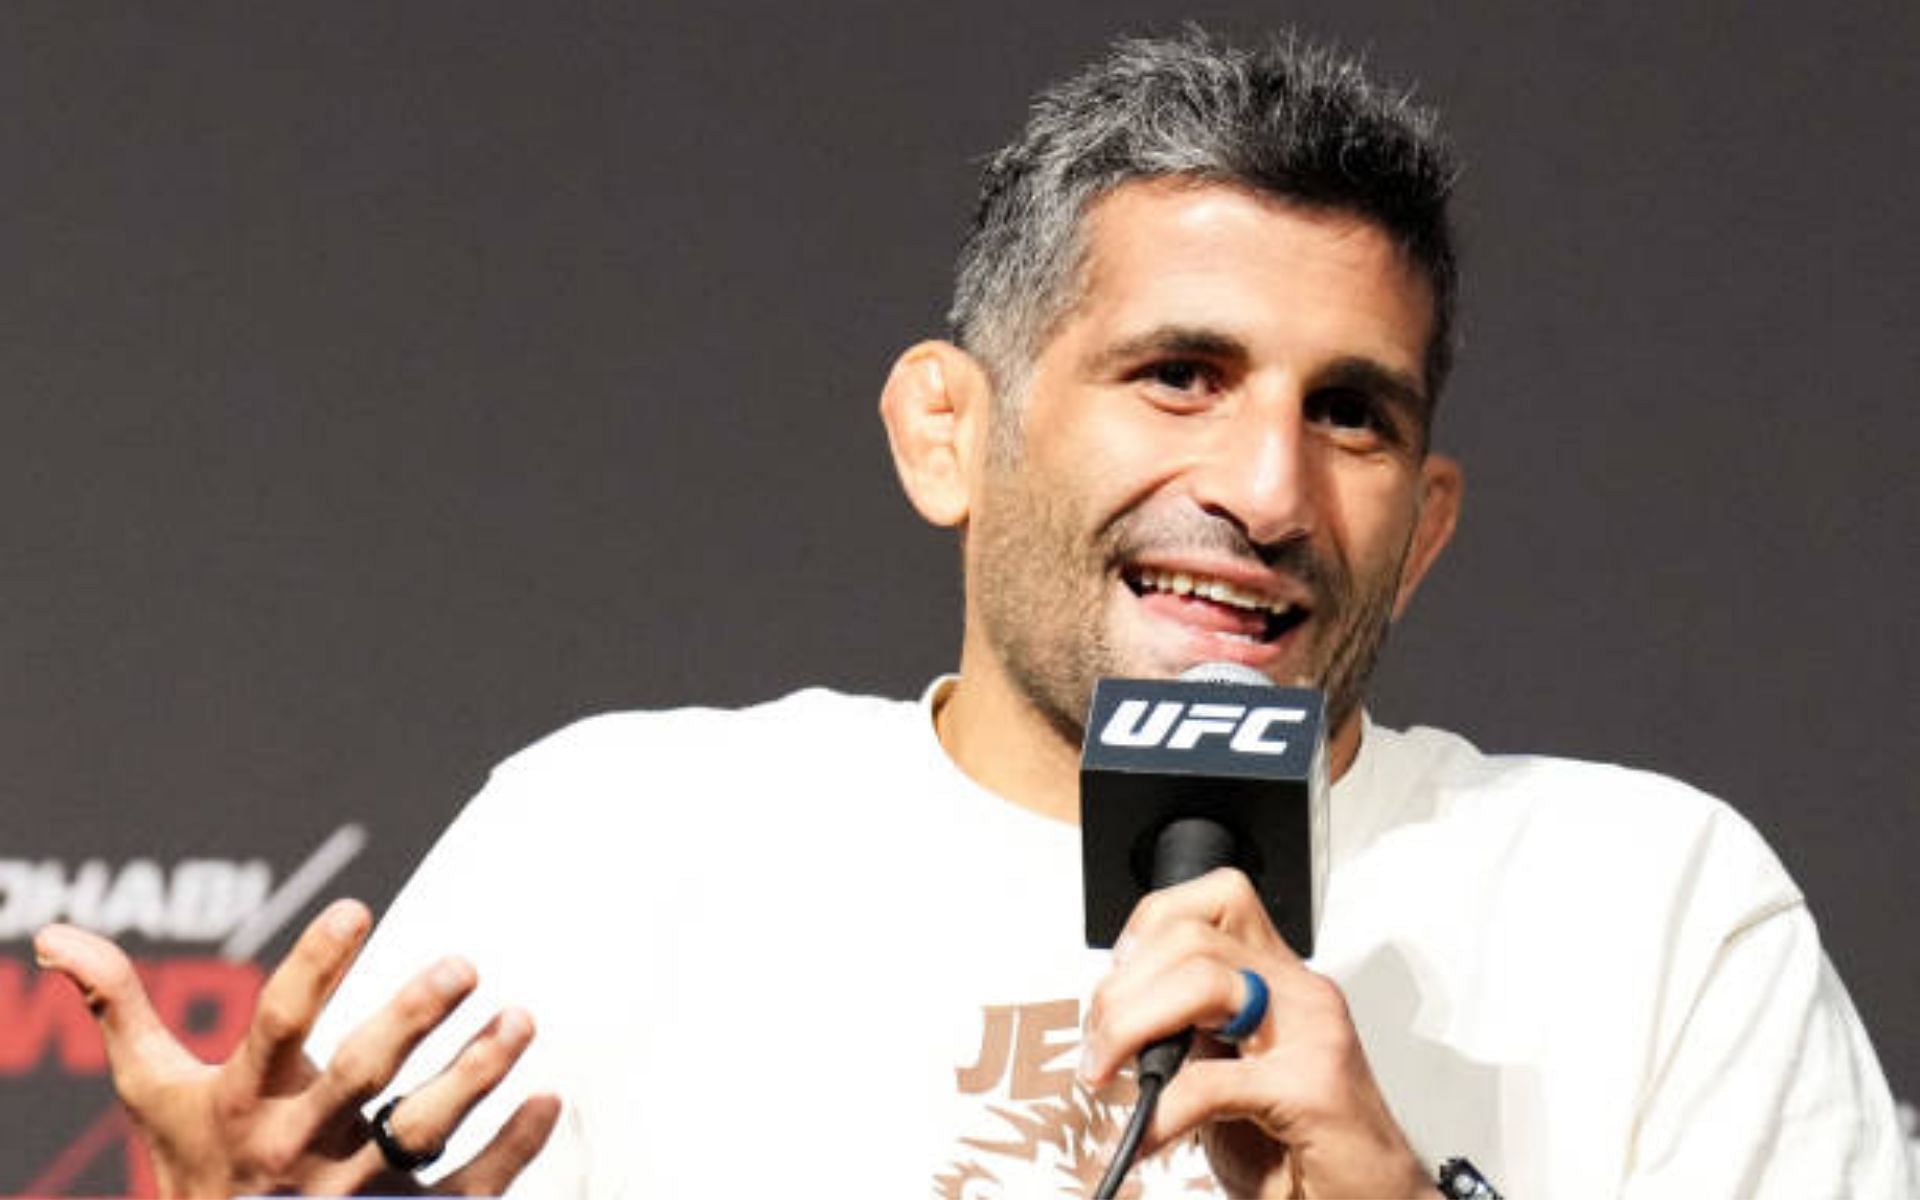 Beneil Dariush thinks UFC may give title shot to higher ranked fighter before him